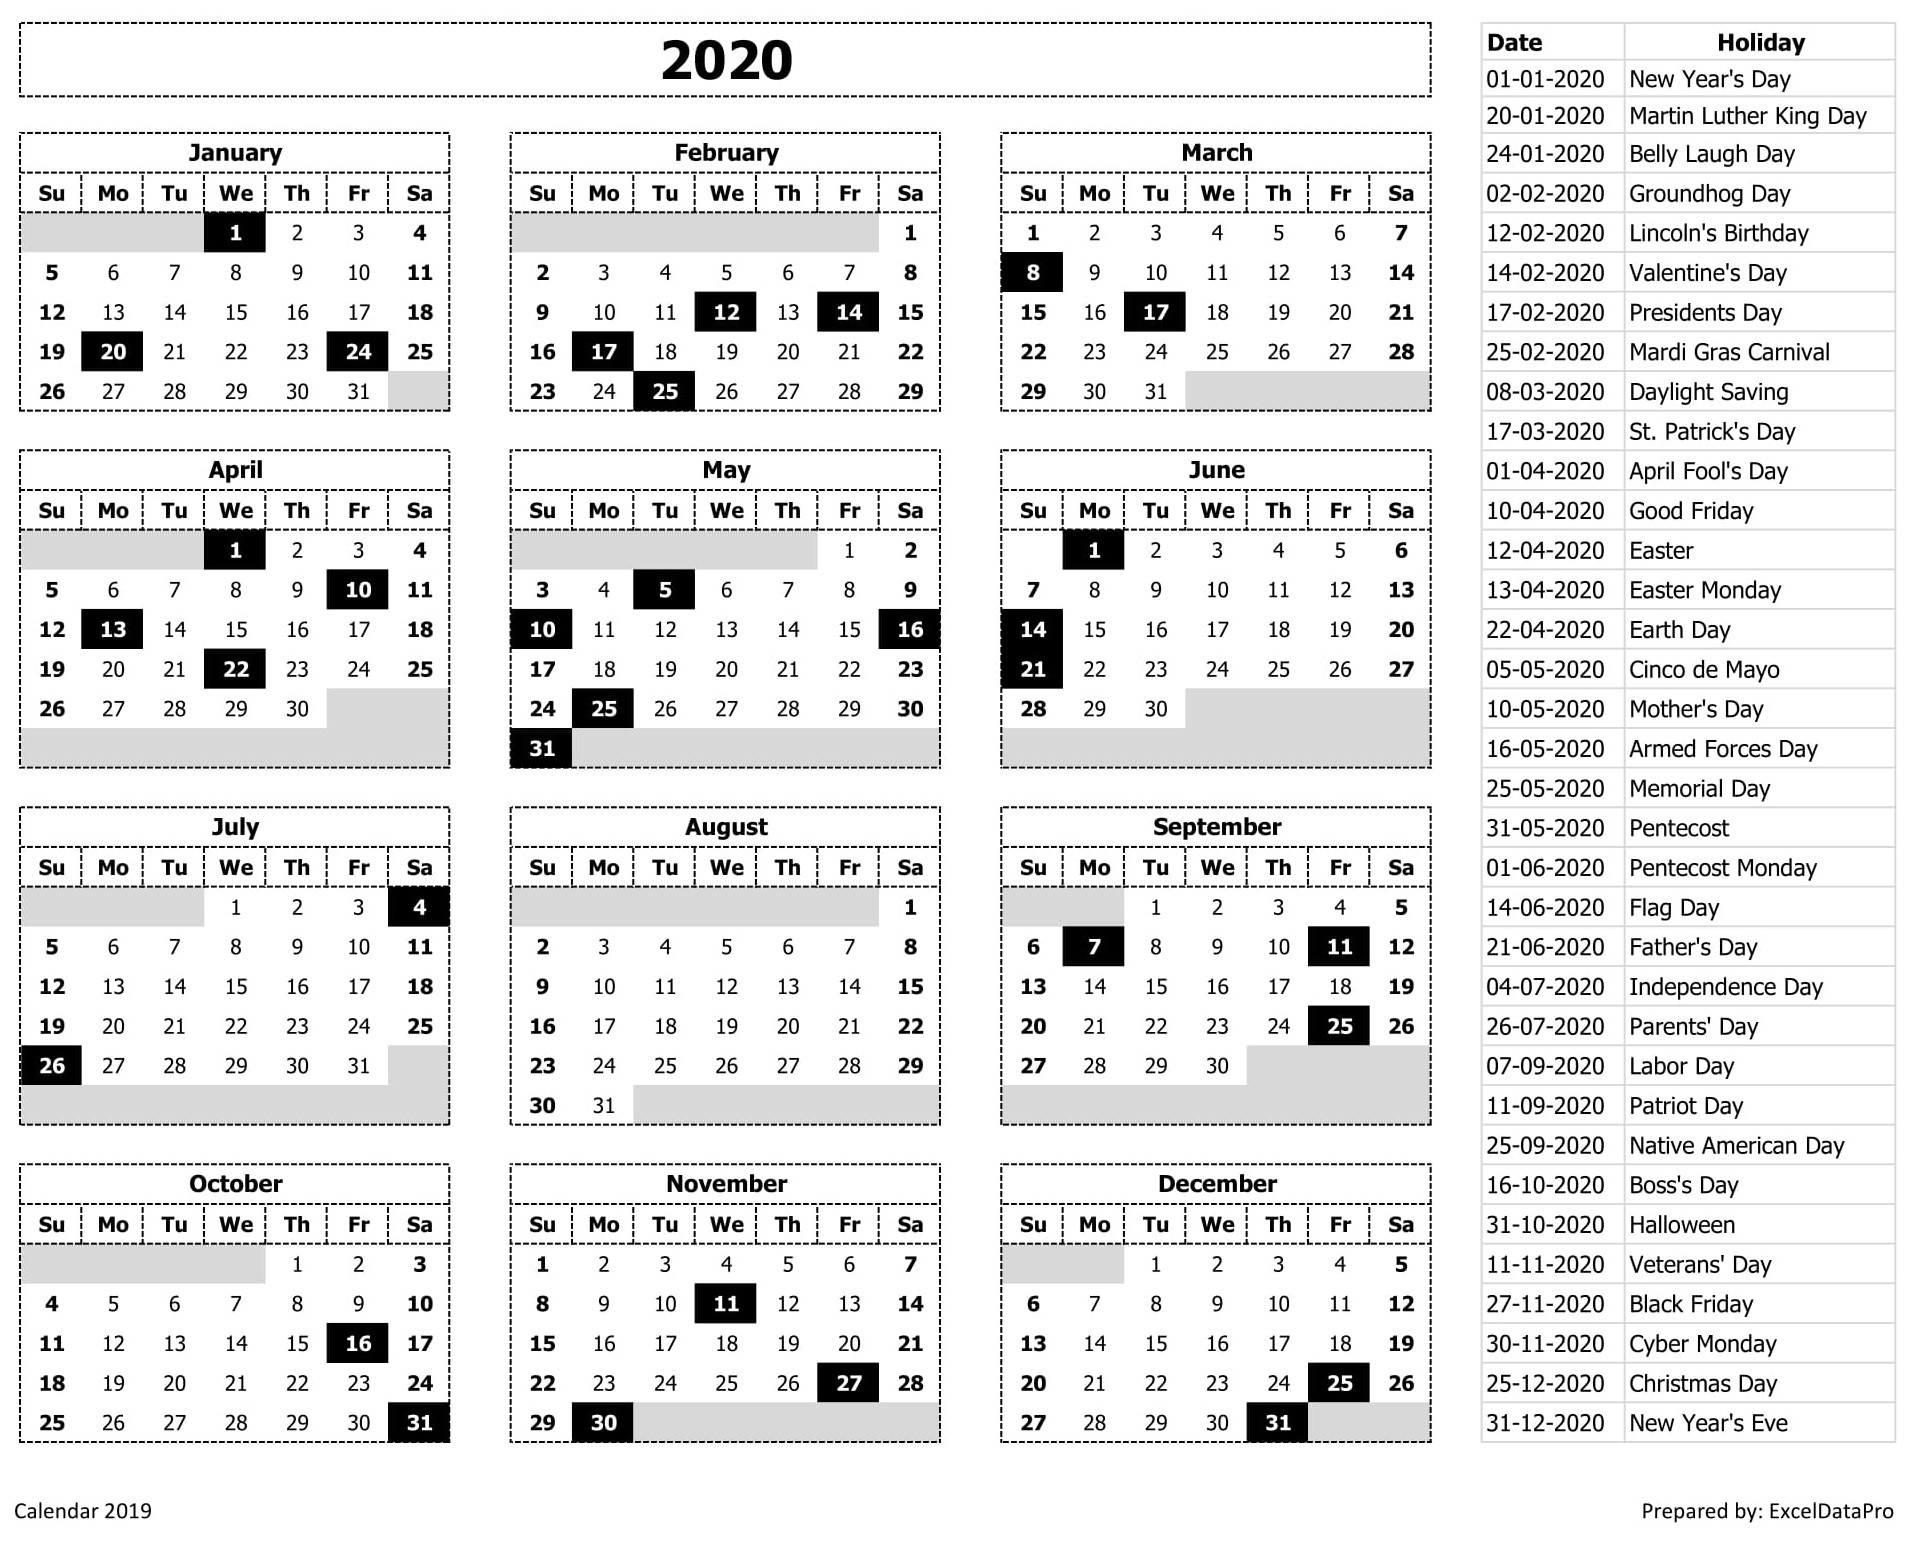 2020 Calendar Excel Templates, Printable Pdfs &amp; Images-List Of Holidays 2020